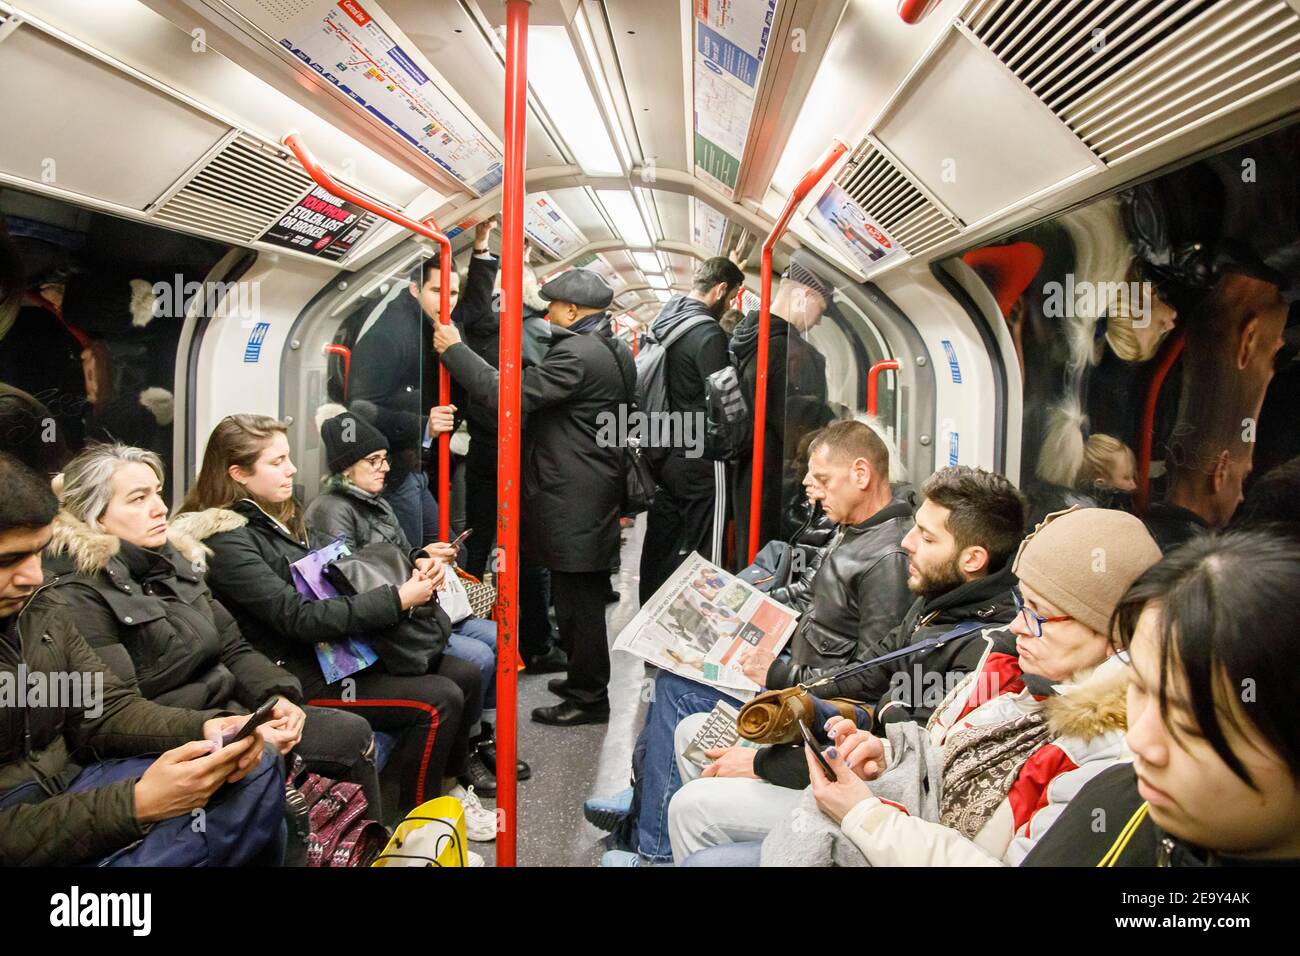 London underground tube train carriage crowded with people Stock Photo